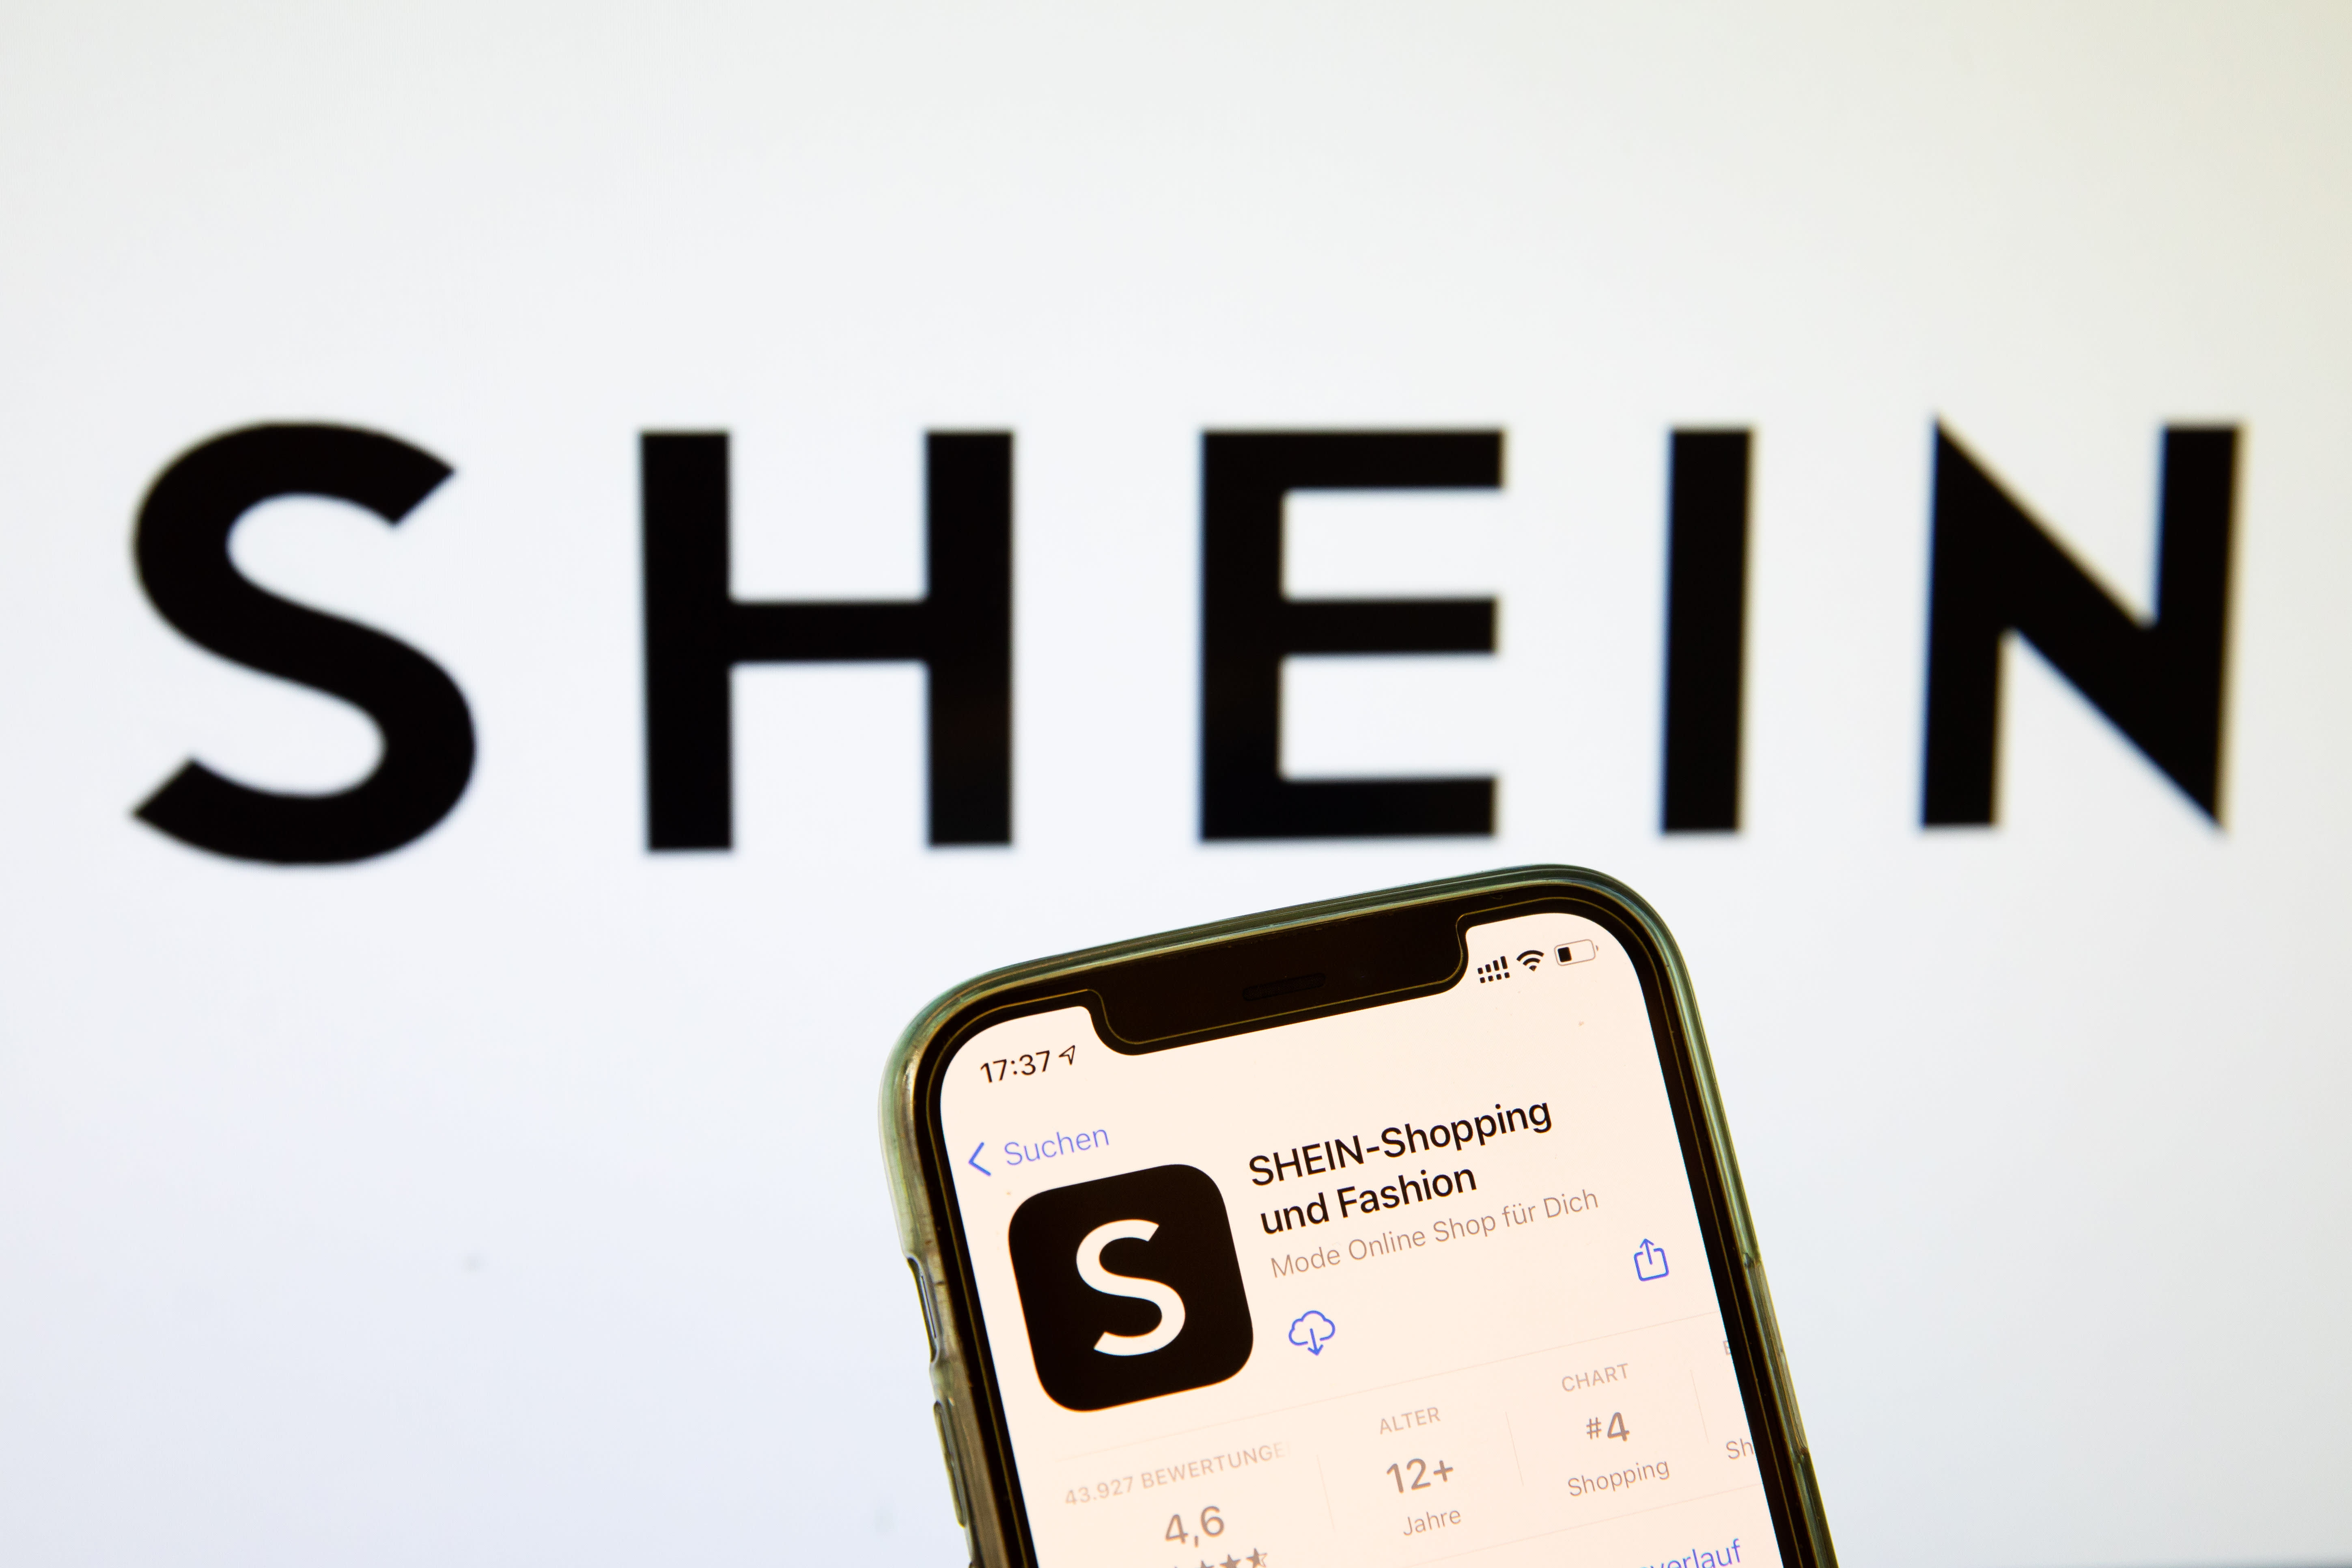 China’s Shein shelves U.S. IPO plan again due to uncertain markets: Reuters, citing sources